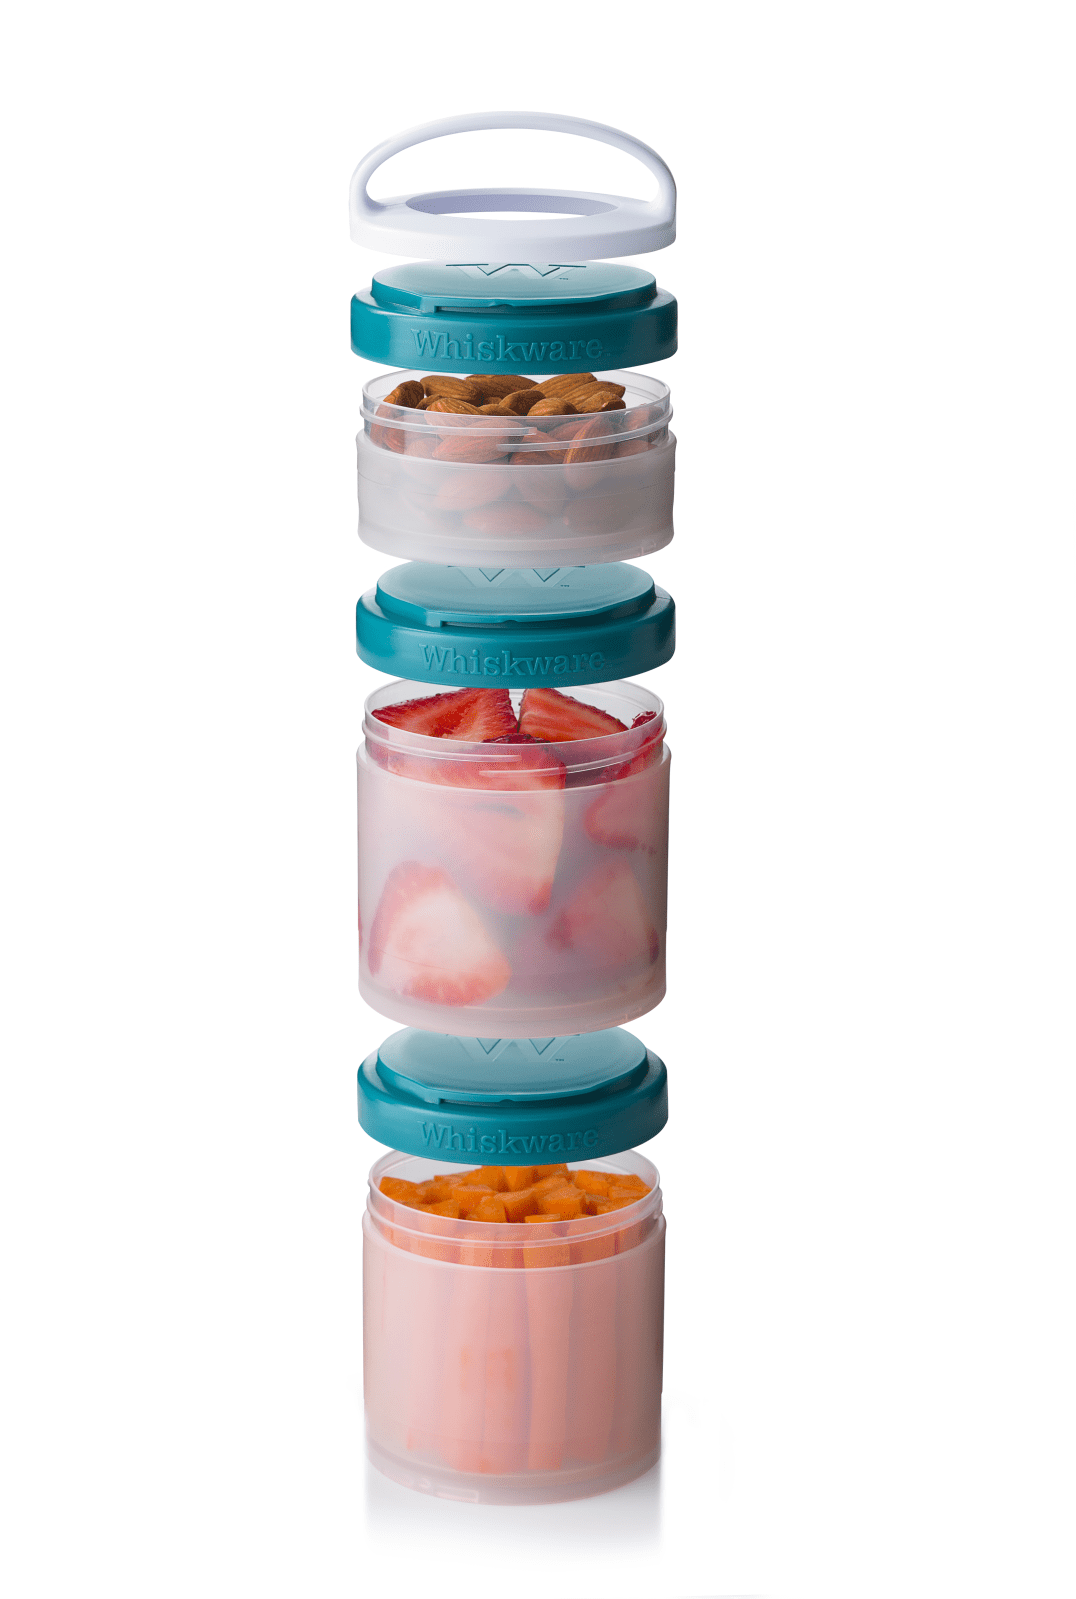 Whiskware Just for Fun Stackable Snack Pack Containers - Oink